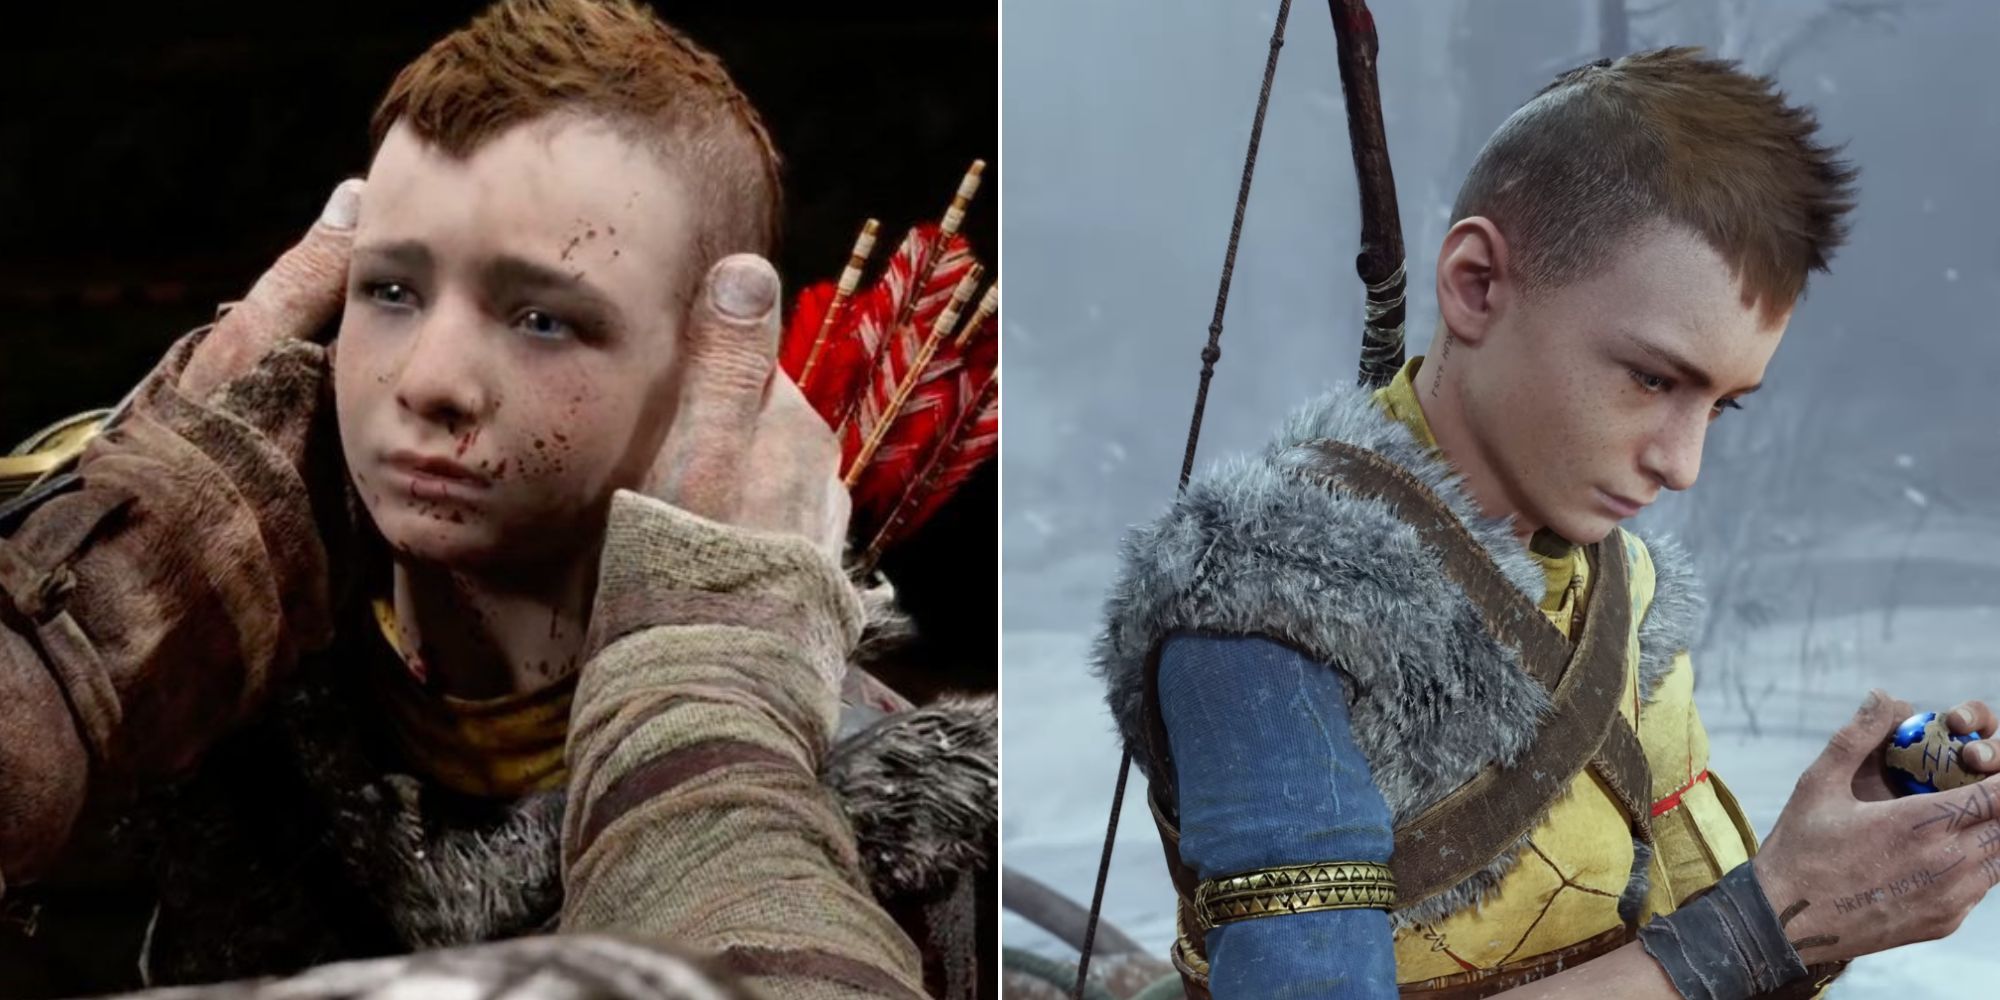 Split image of God of War Atreus. On the left is a photo of Kratos holding Atreus' head in his hands, from the 2018 game. On the right is Ragnarok Atreus looking at a strange ball in his hand.